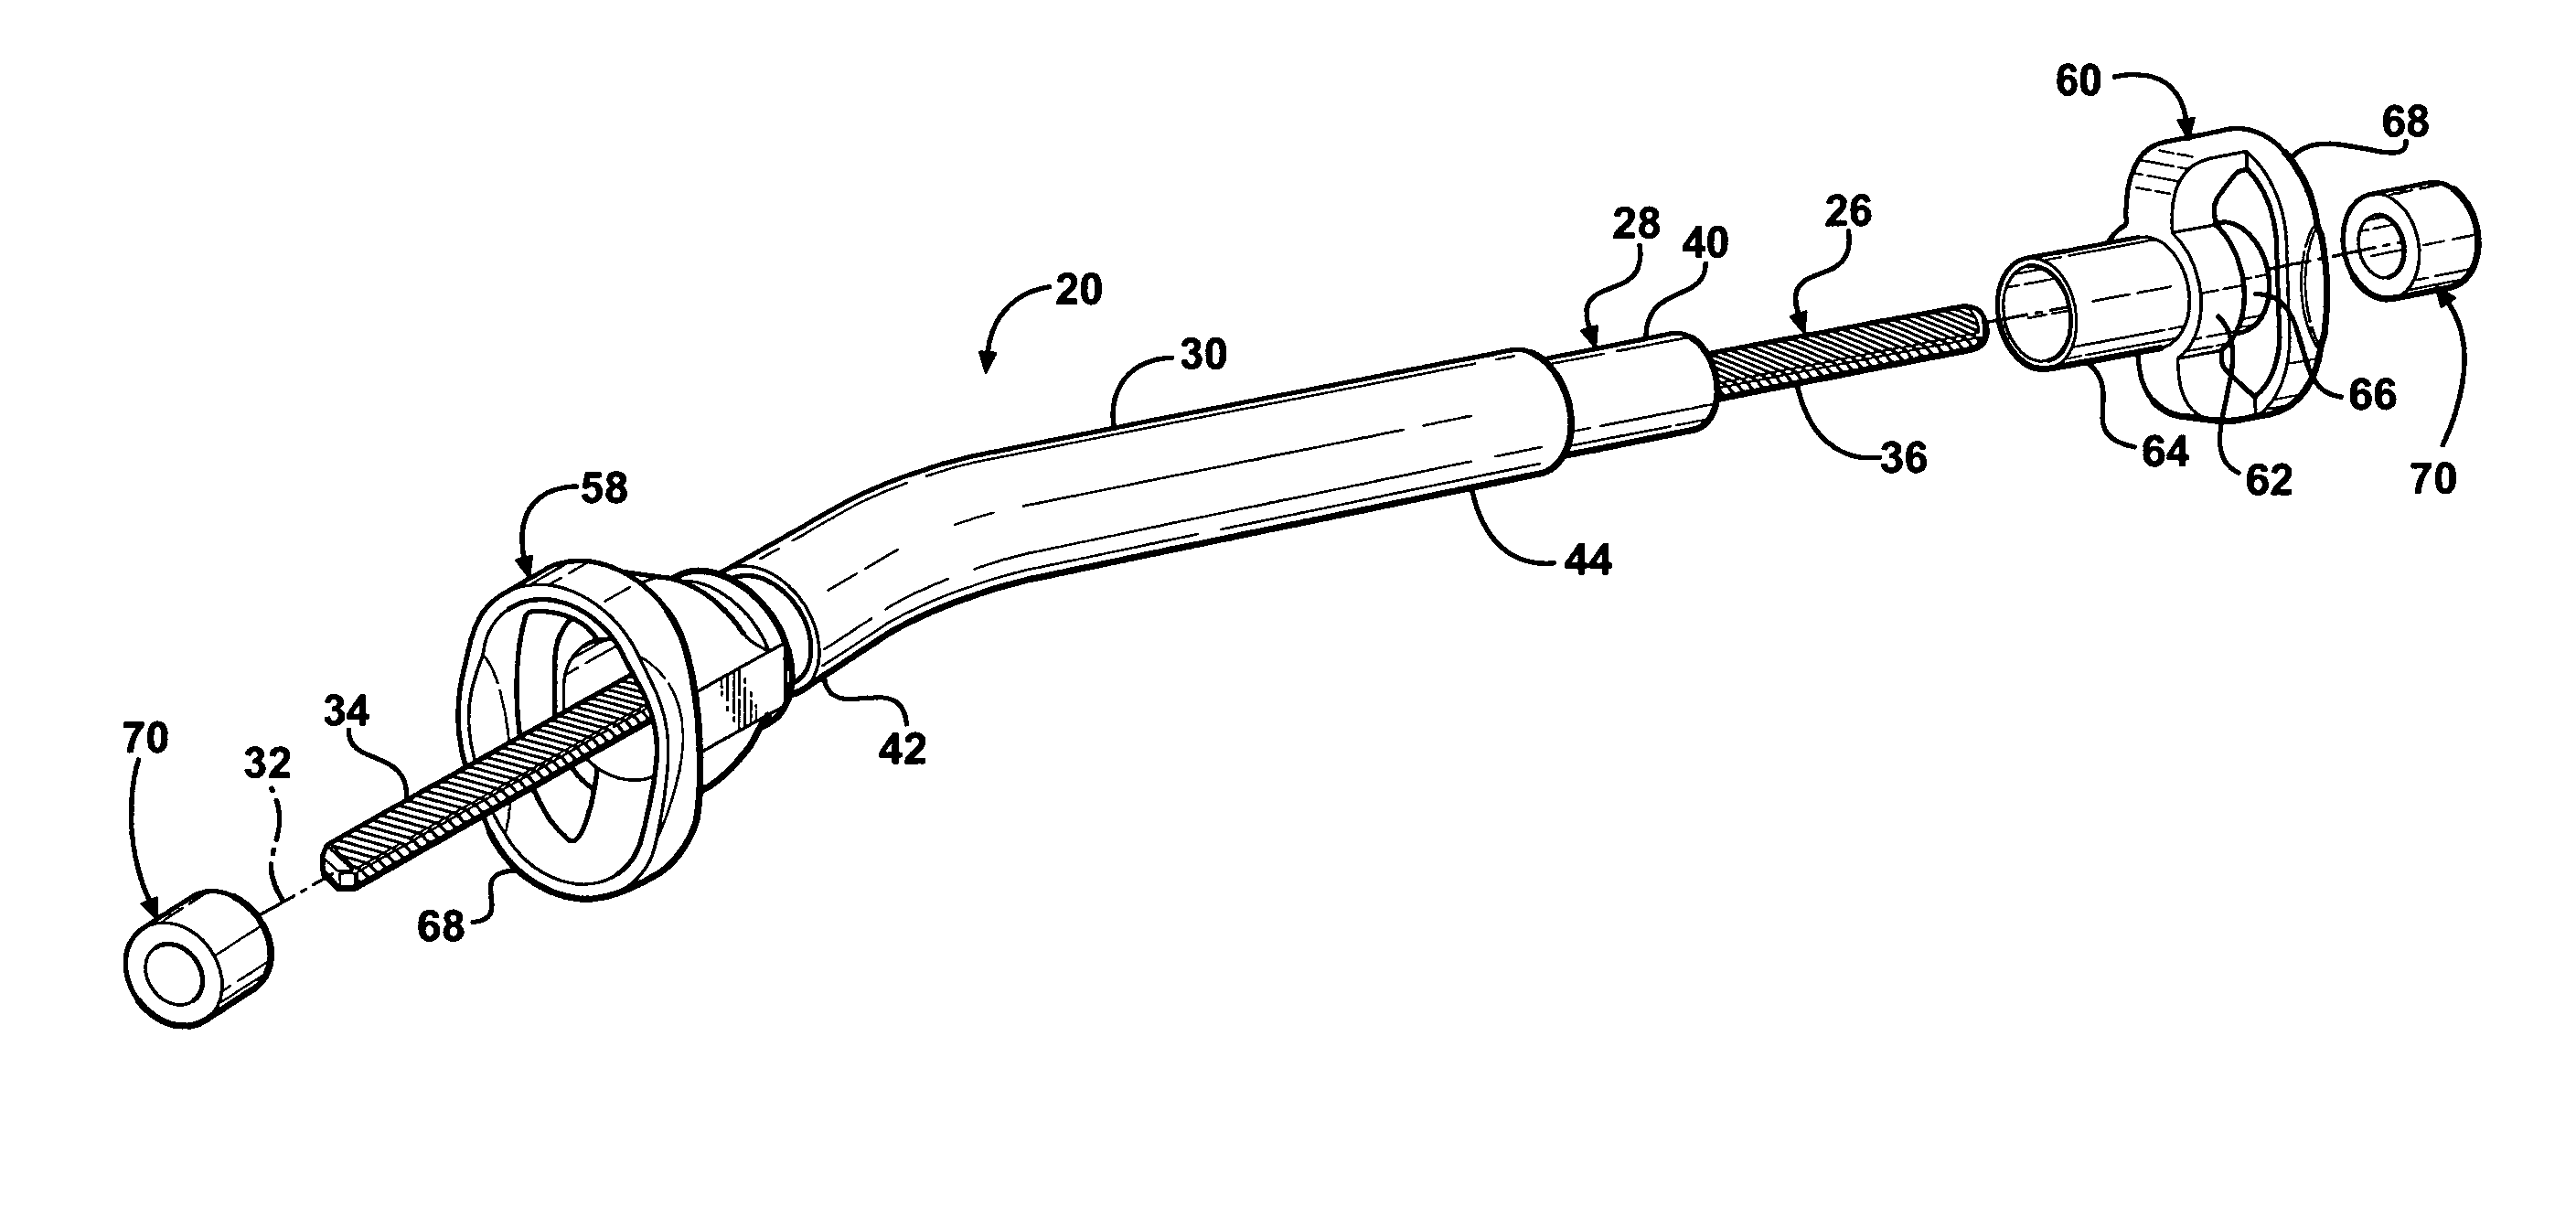 Steering column assembly having a rotating drive cable device